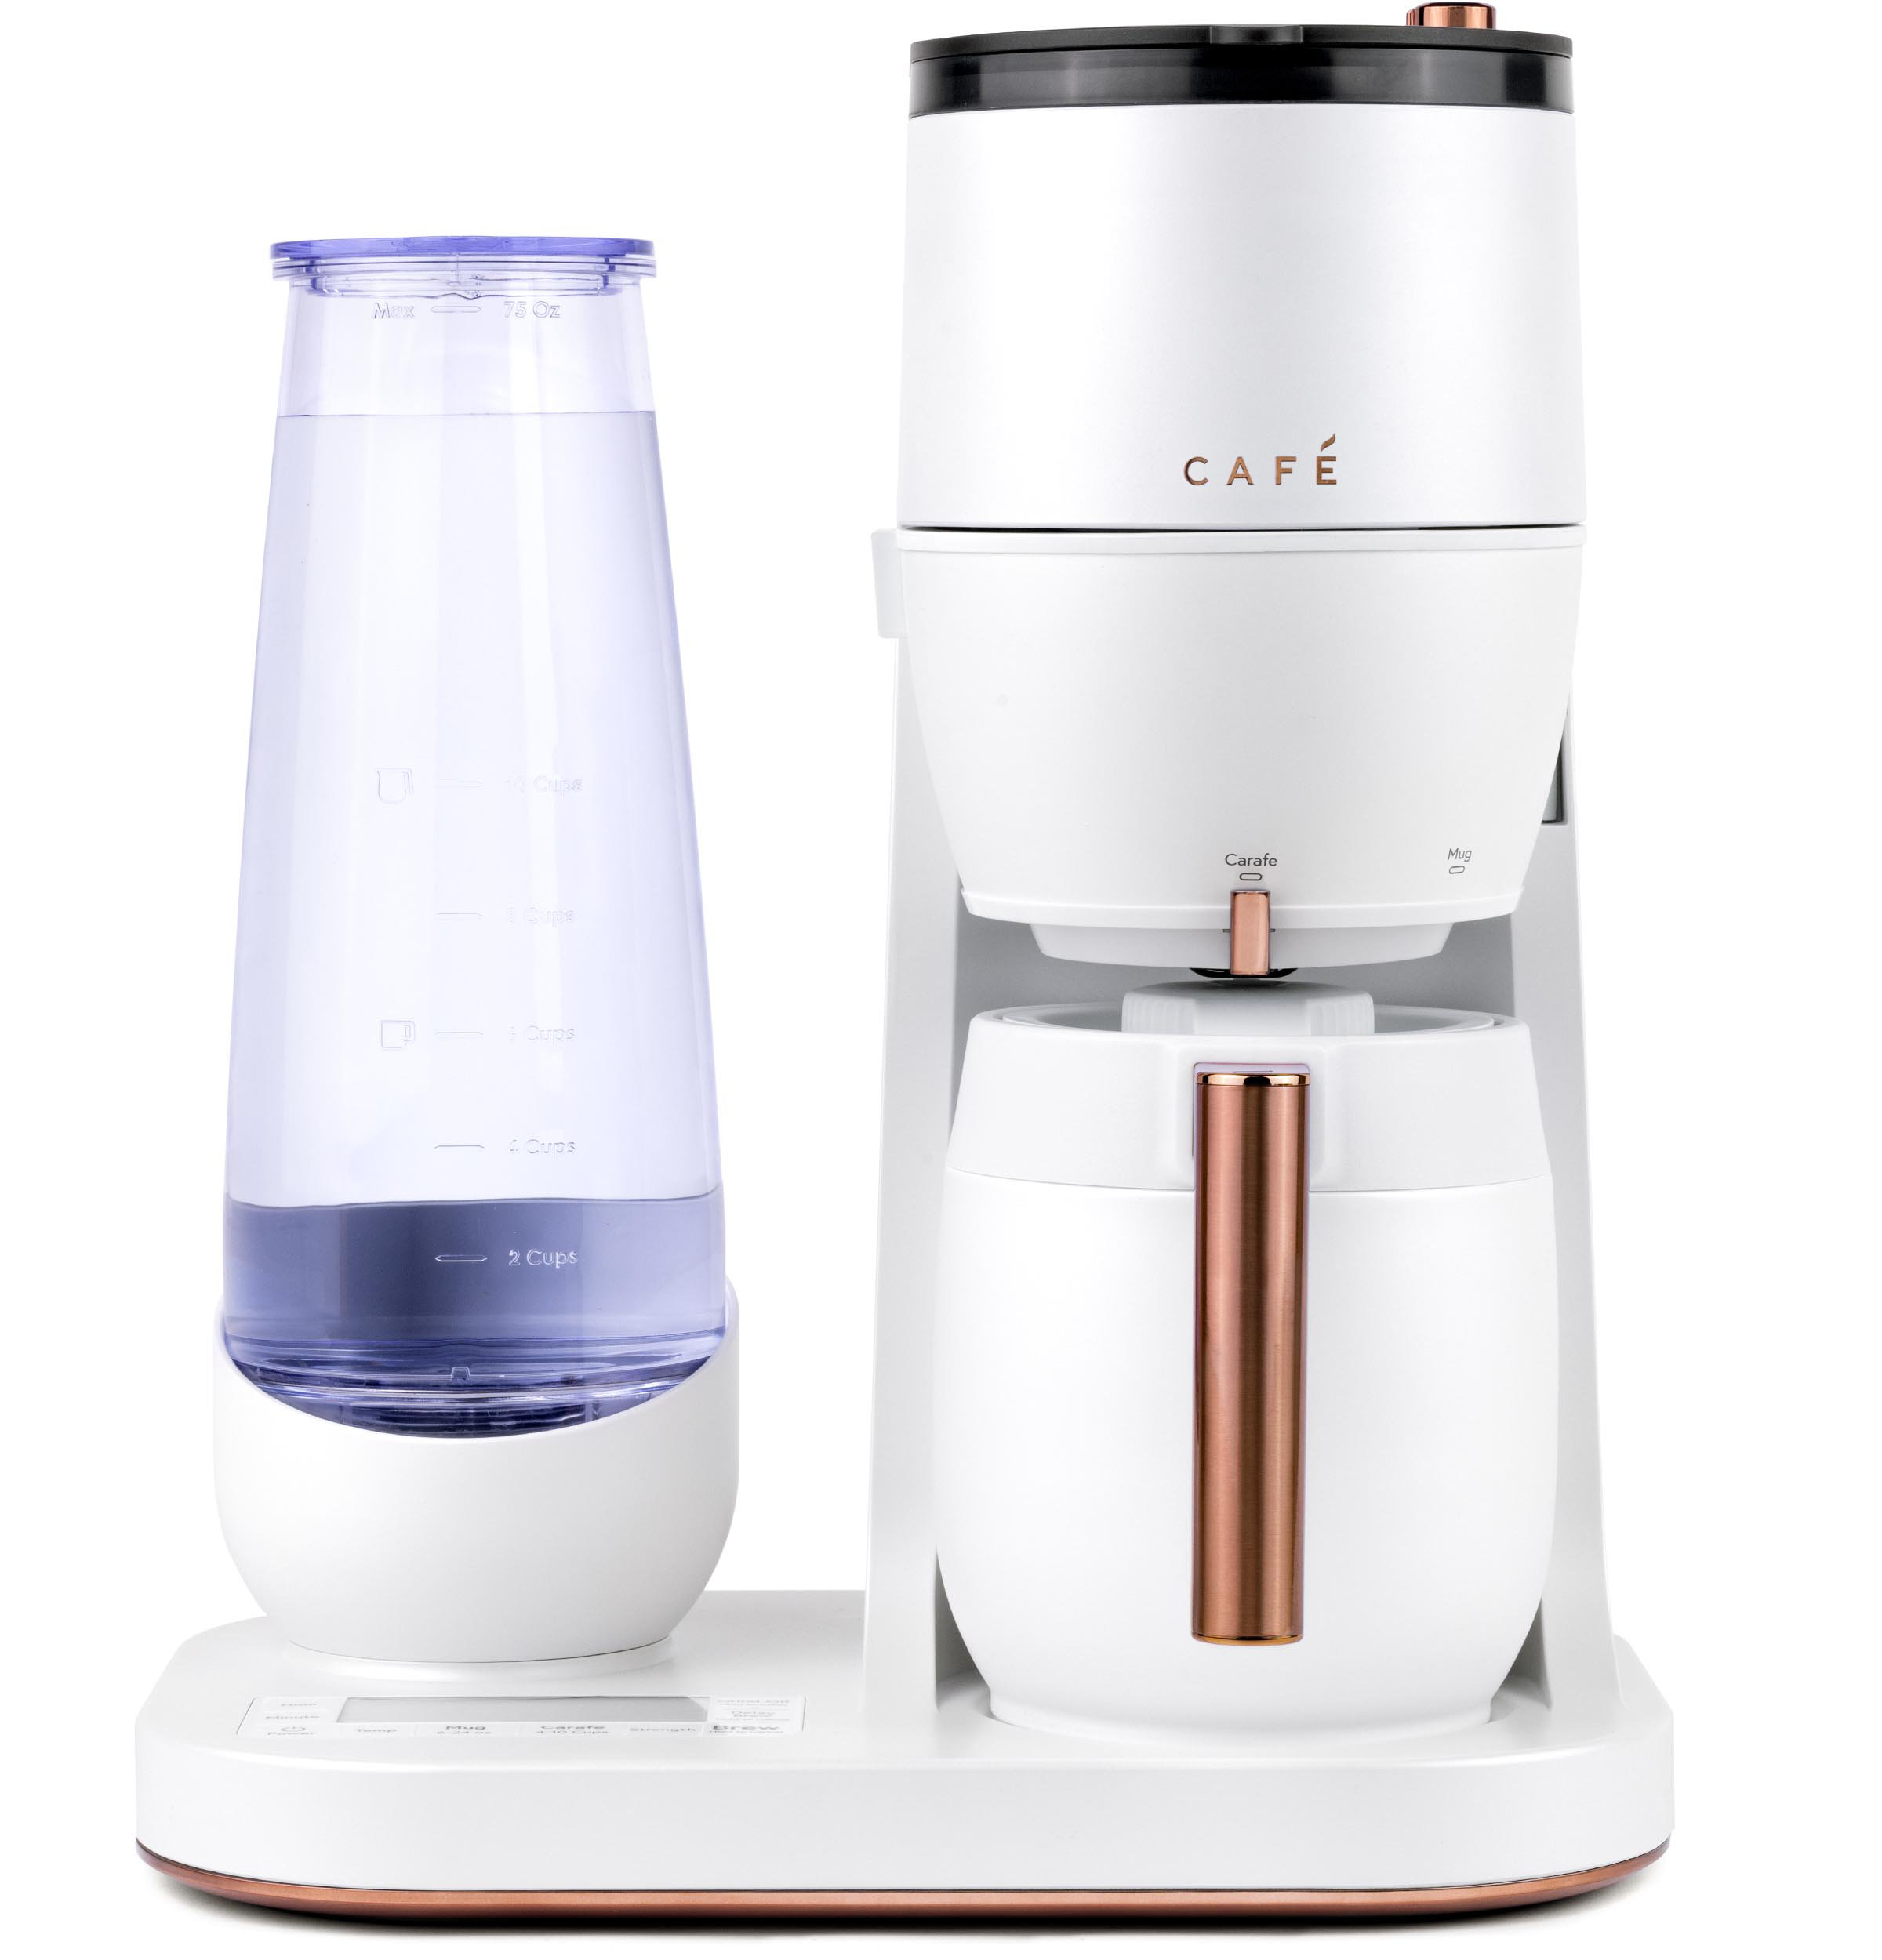 Cafe Cafã Specialty Grind and Brew Coffee Maker with Thermal Carafe White